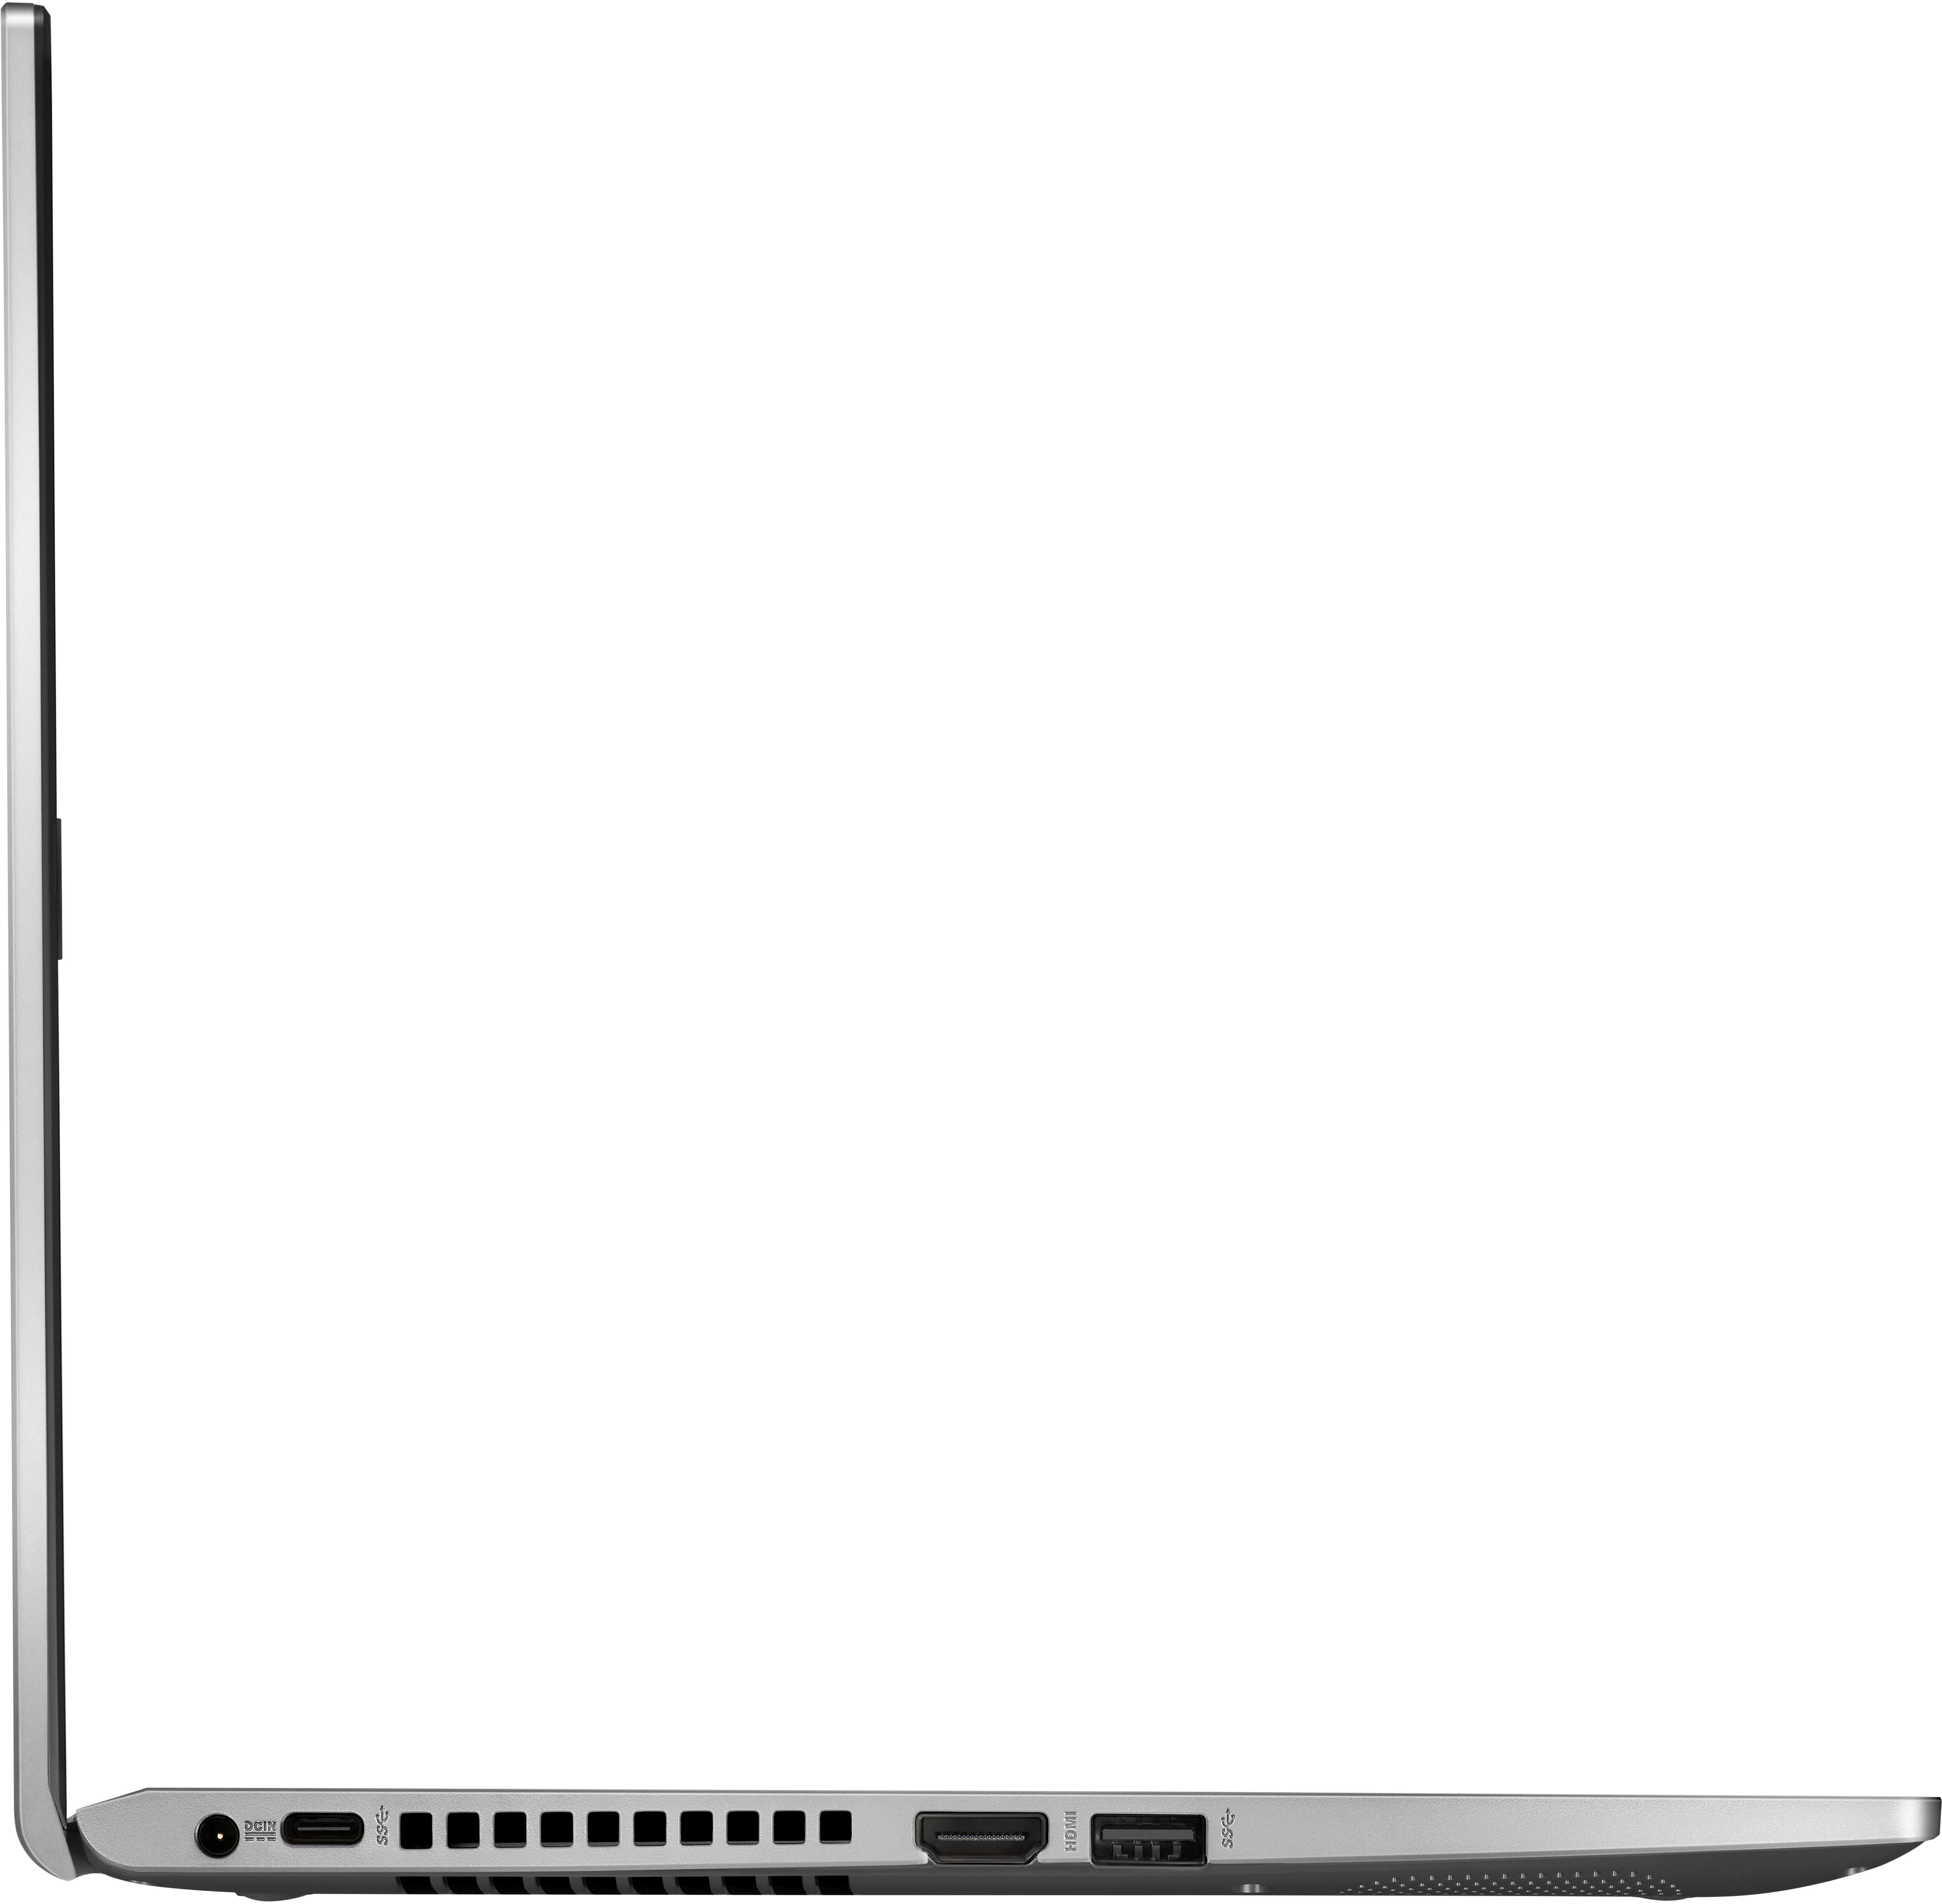 ASUS VivoBook 14 (F1400/X1400, 11th Gen Intel) - Specs, Tests, and Prices